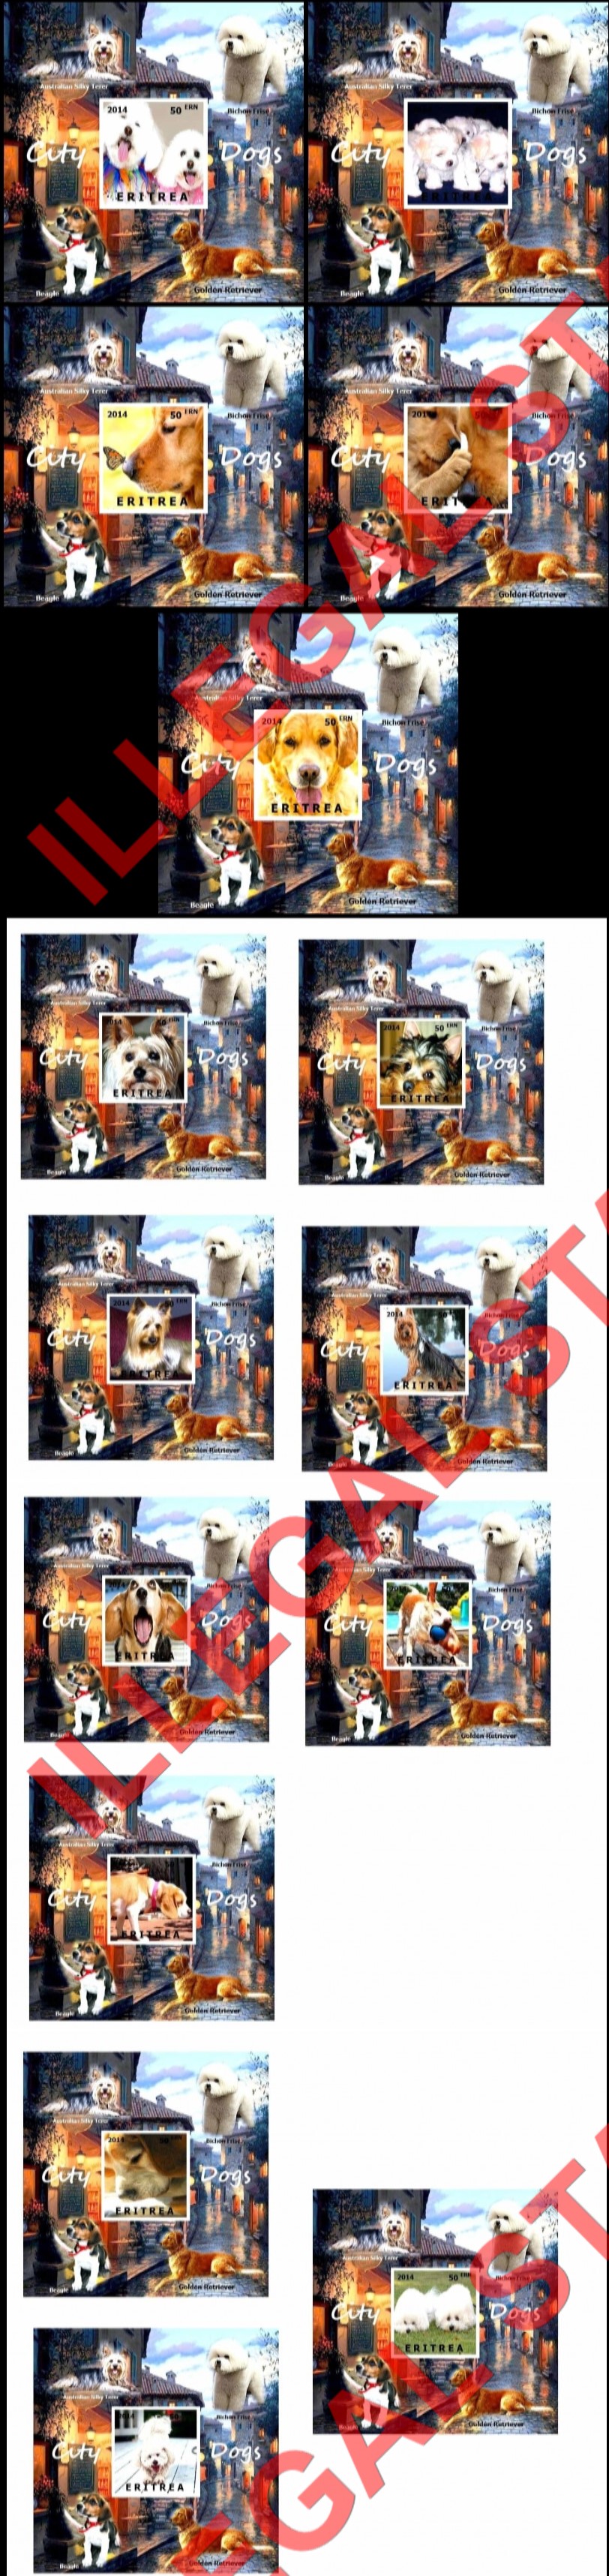 Eritrea 2014 City Dogs Counterfeit Illegal Stamp Souvenir Sheets of 1